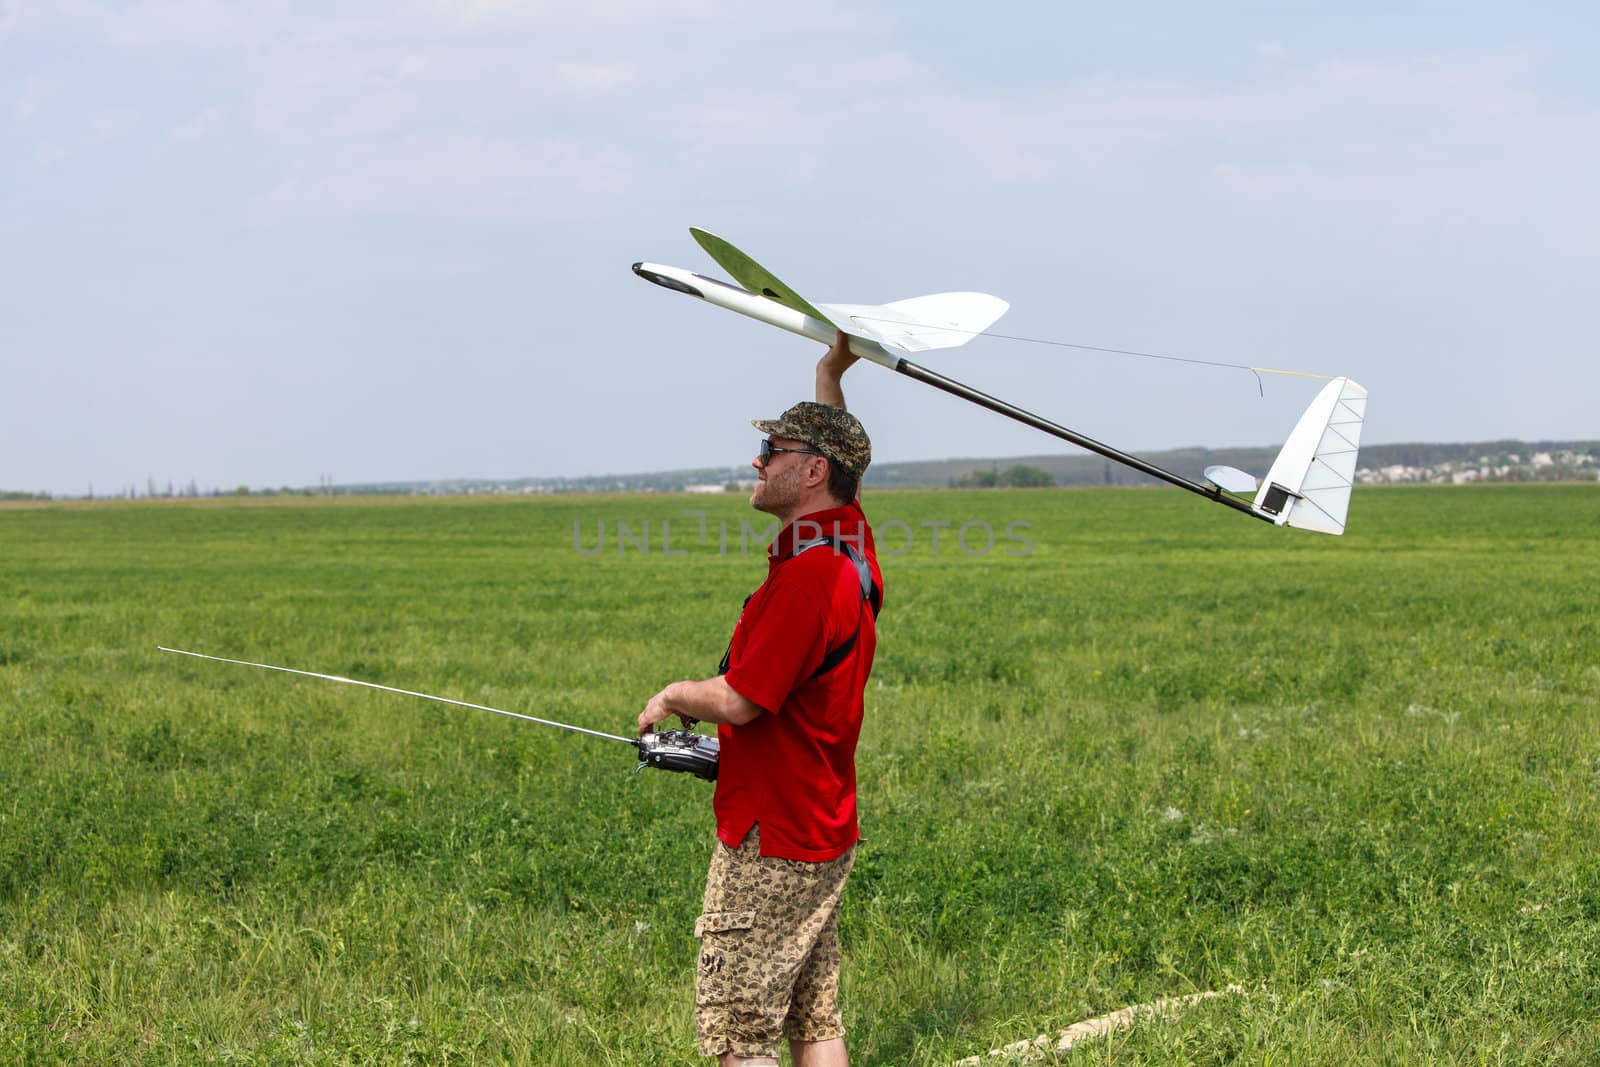 Man launches into the blue sky RC glider